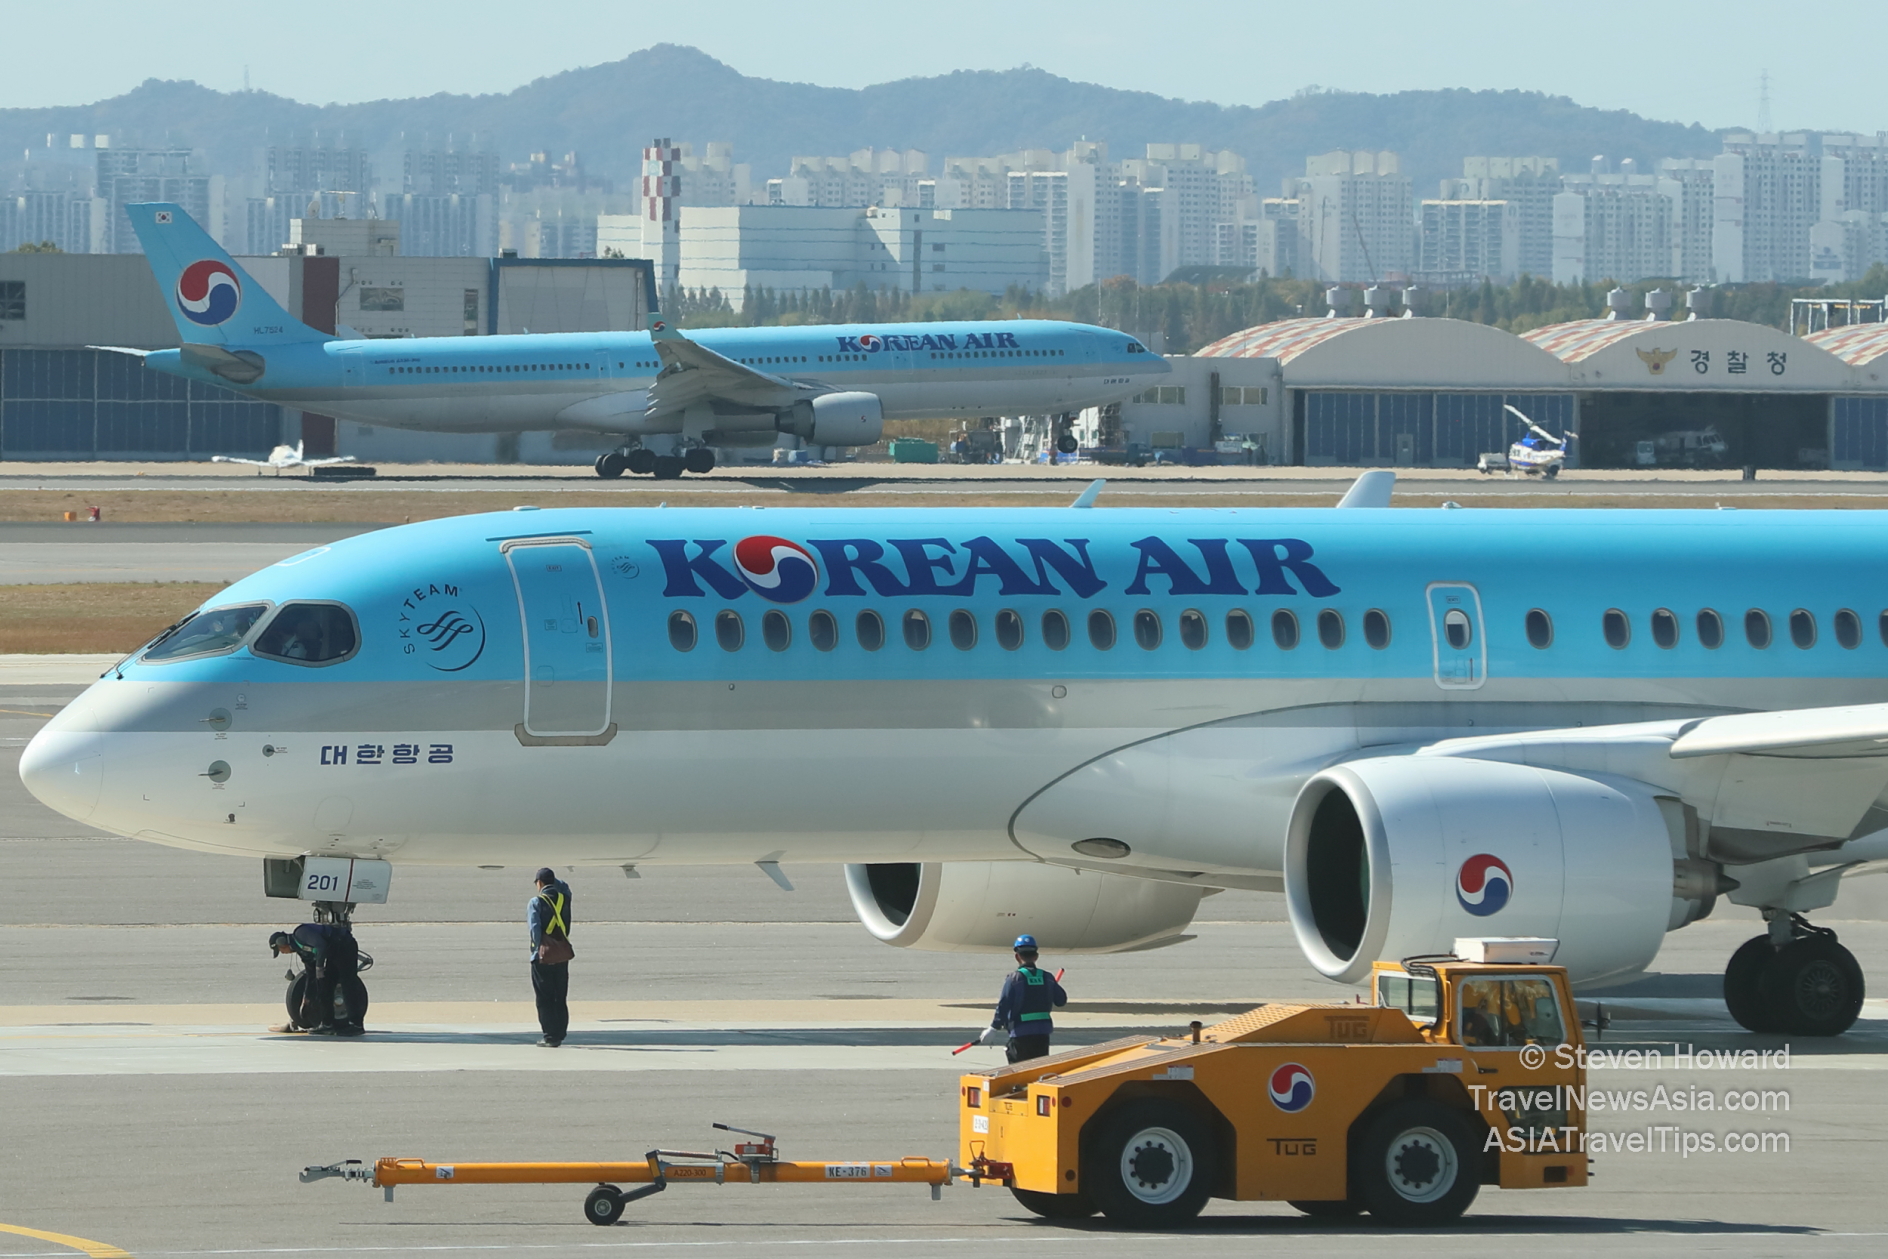 Korean Air aircraft. Picture by Steven Howard of TravelNewsAsia.com. Click to enlarge.